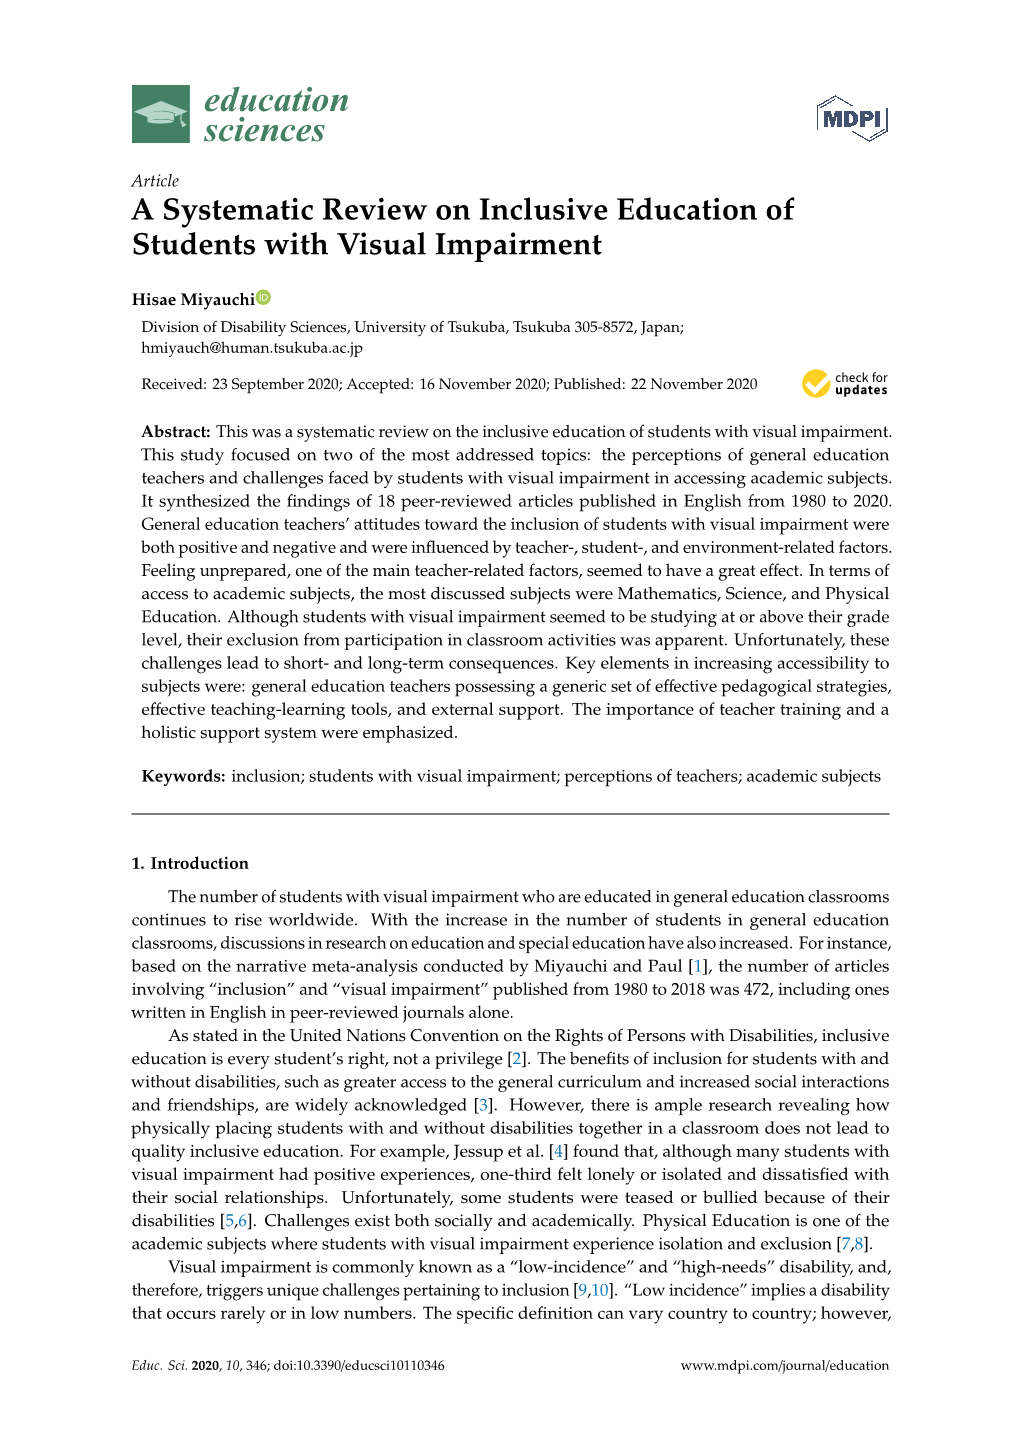 A Systematic Review on Inclusive Education of Students with Visual Impairment